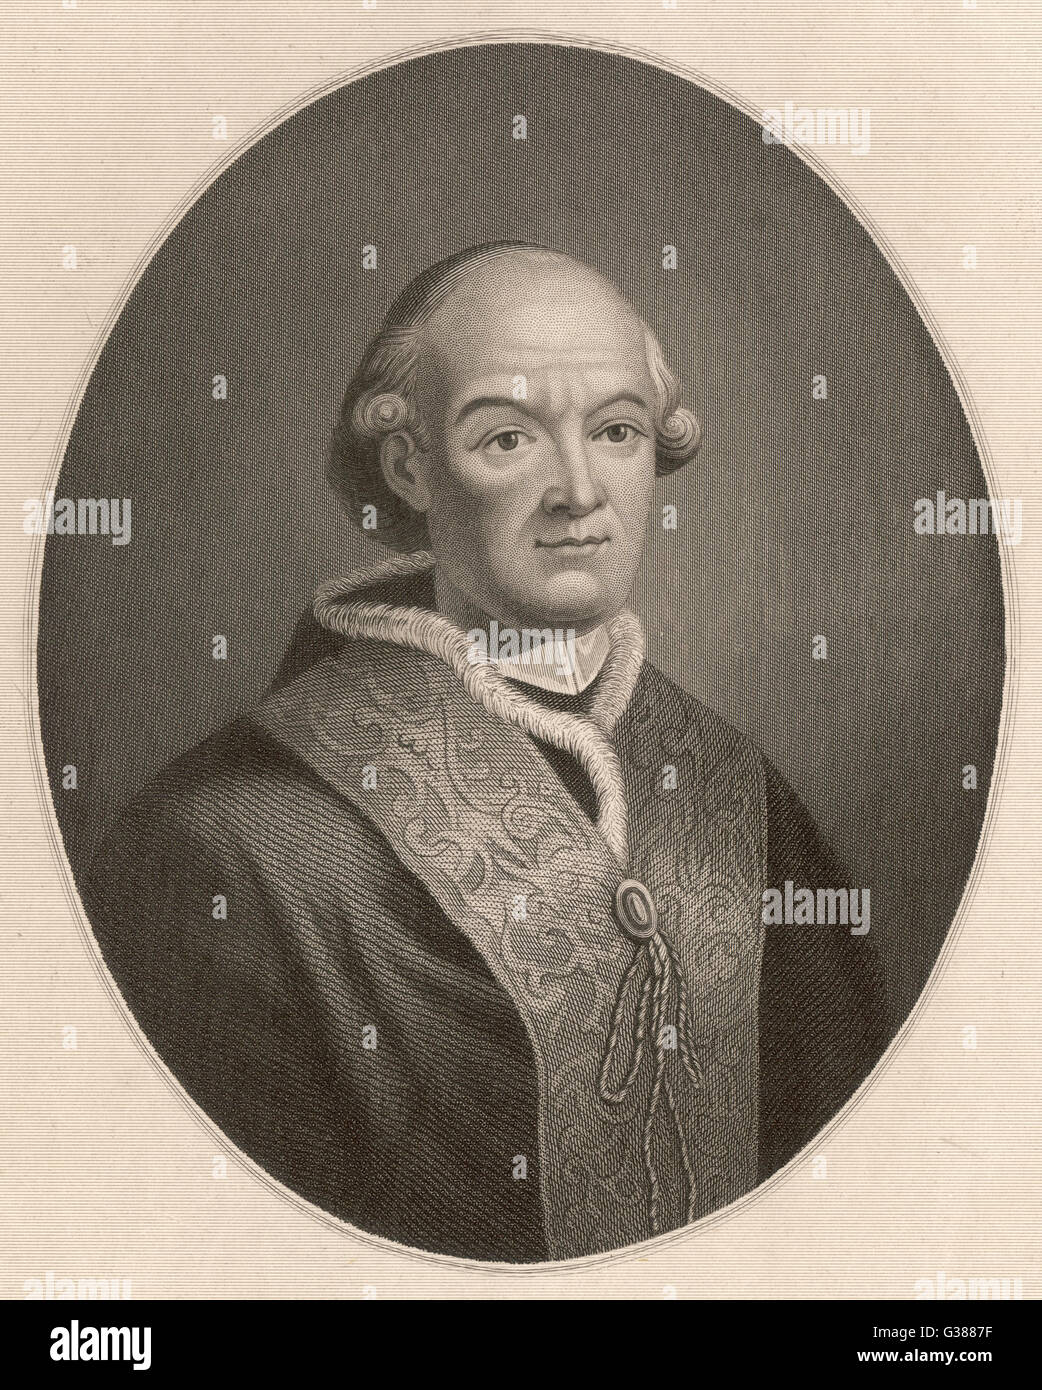 POPE PIUS VI (Giovanni Angelo Braschi)  captured and deported to  Valence by the French      Date: reigned 1775 - 1799 Stock Photo